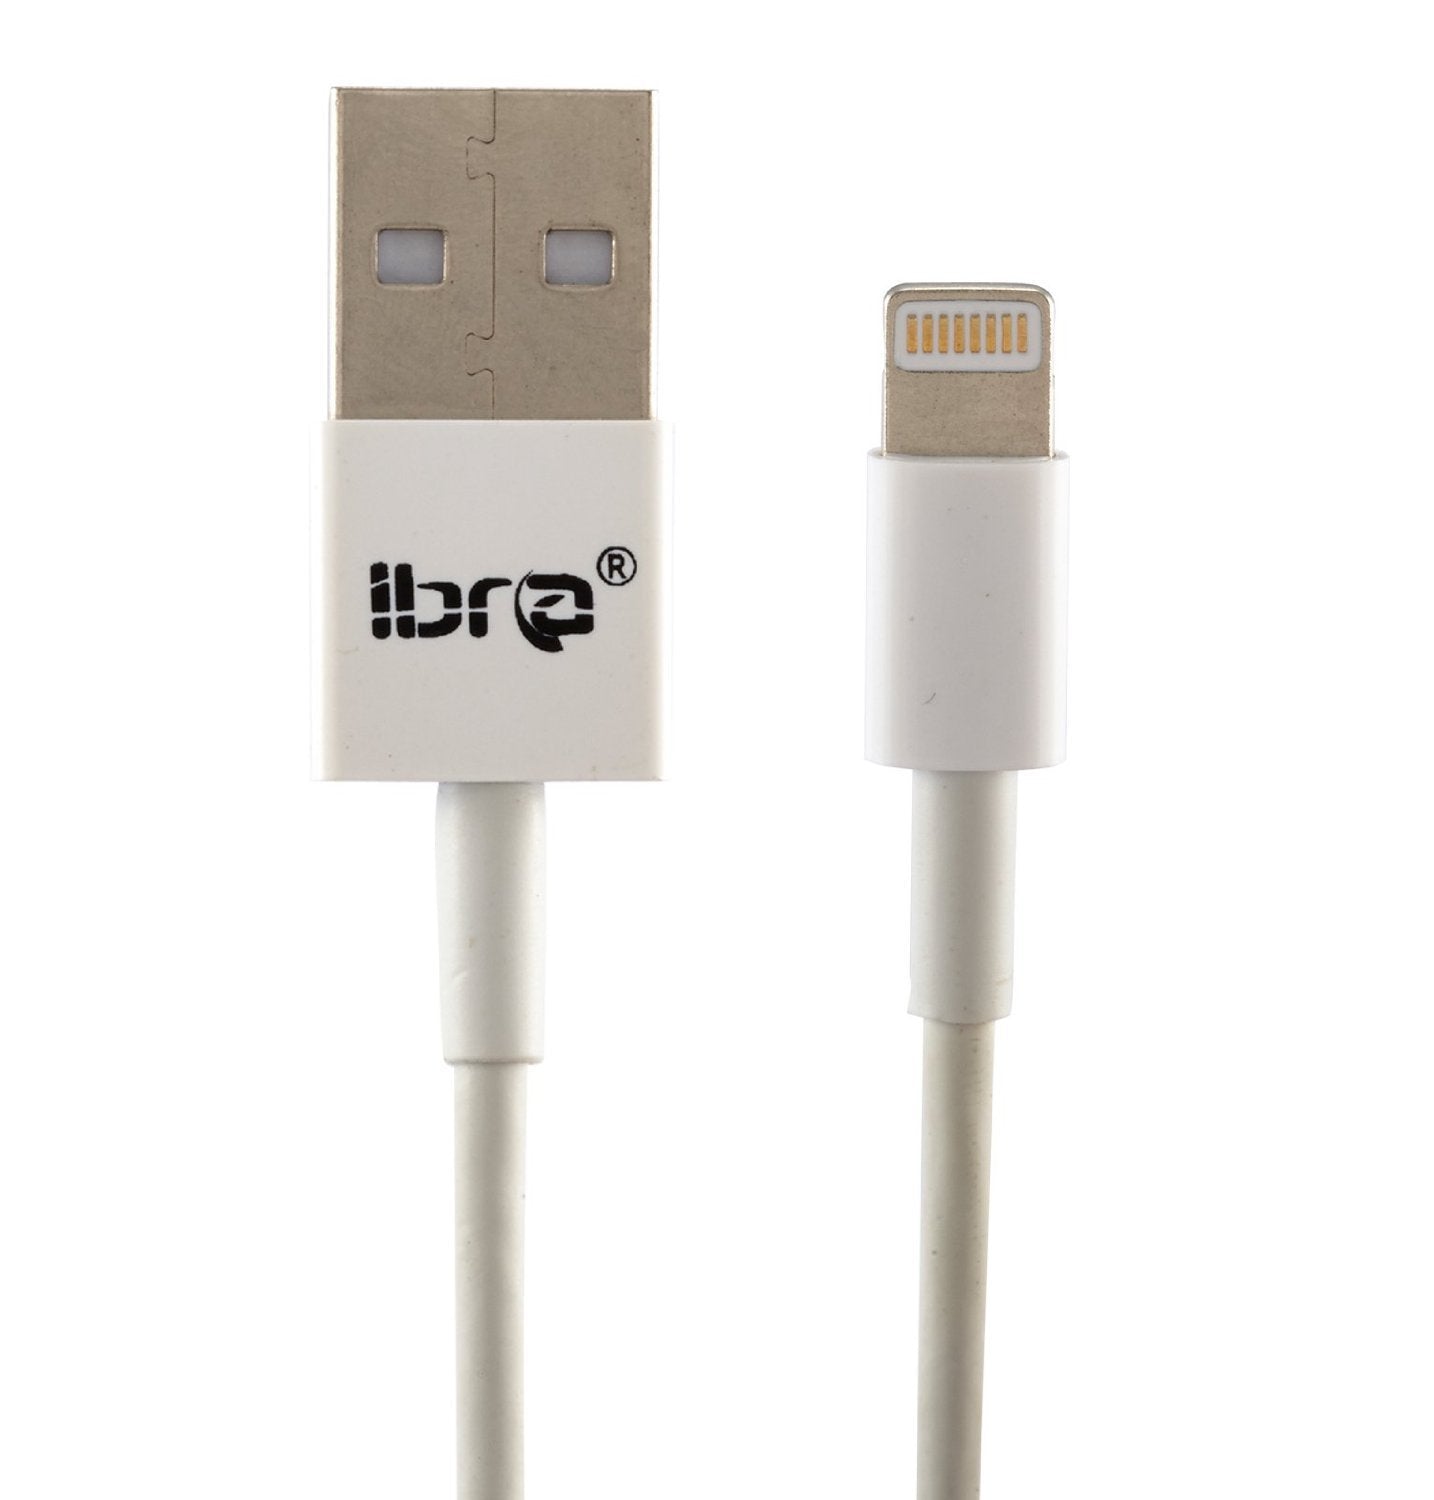 IBRA Lightning to USB Cable with 2M for iPhone 6 6Plus 5s 5c 5, iPad Air Air2 mini mini2 mini3, iPad 4th Gen, iPod touch 5th Gen, and iPod nano 7th Gen [WHITE]